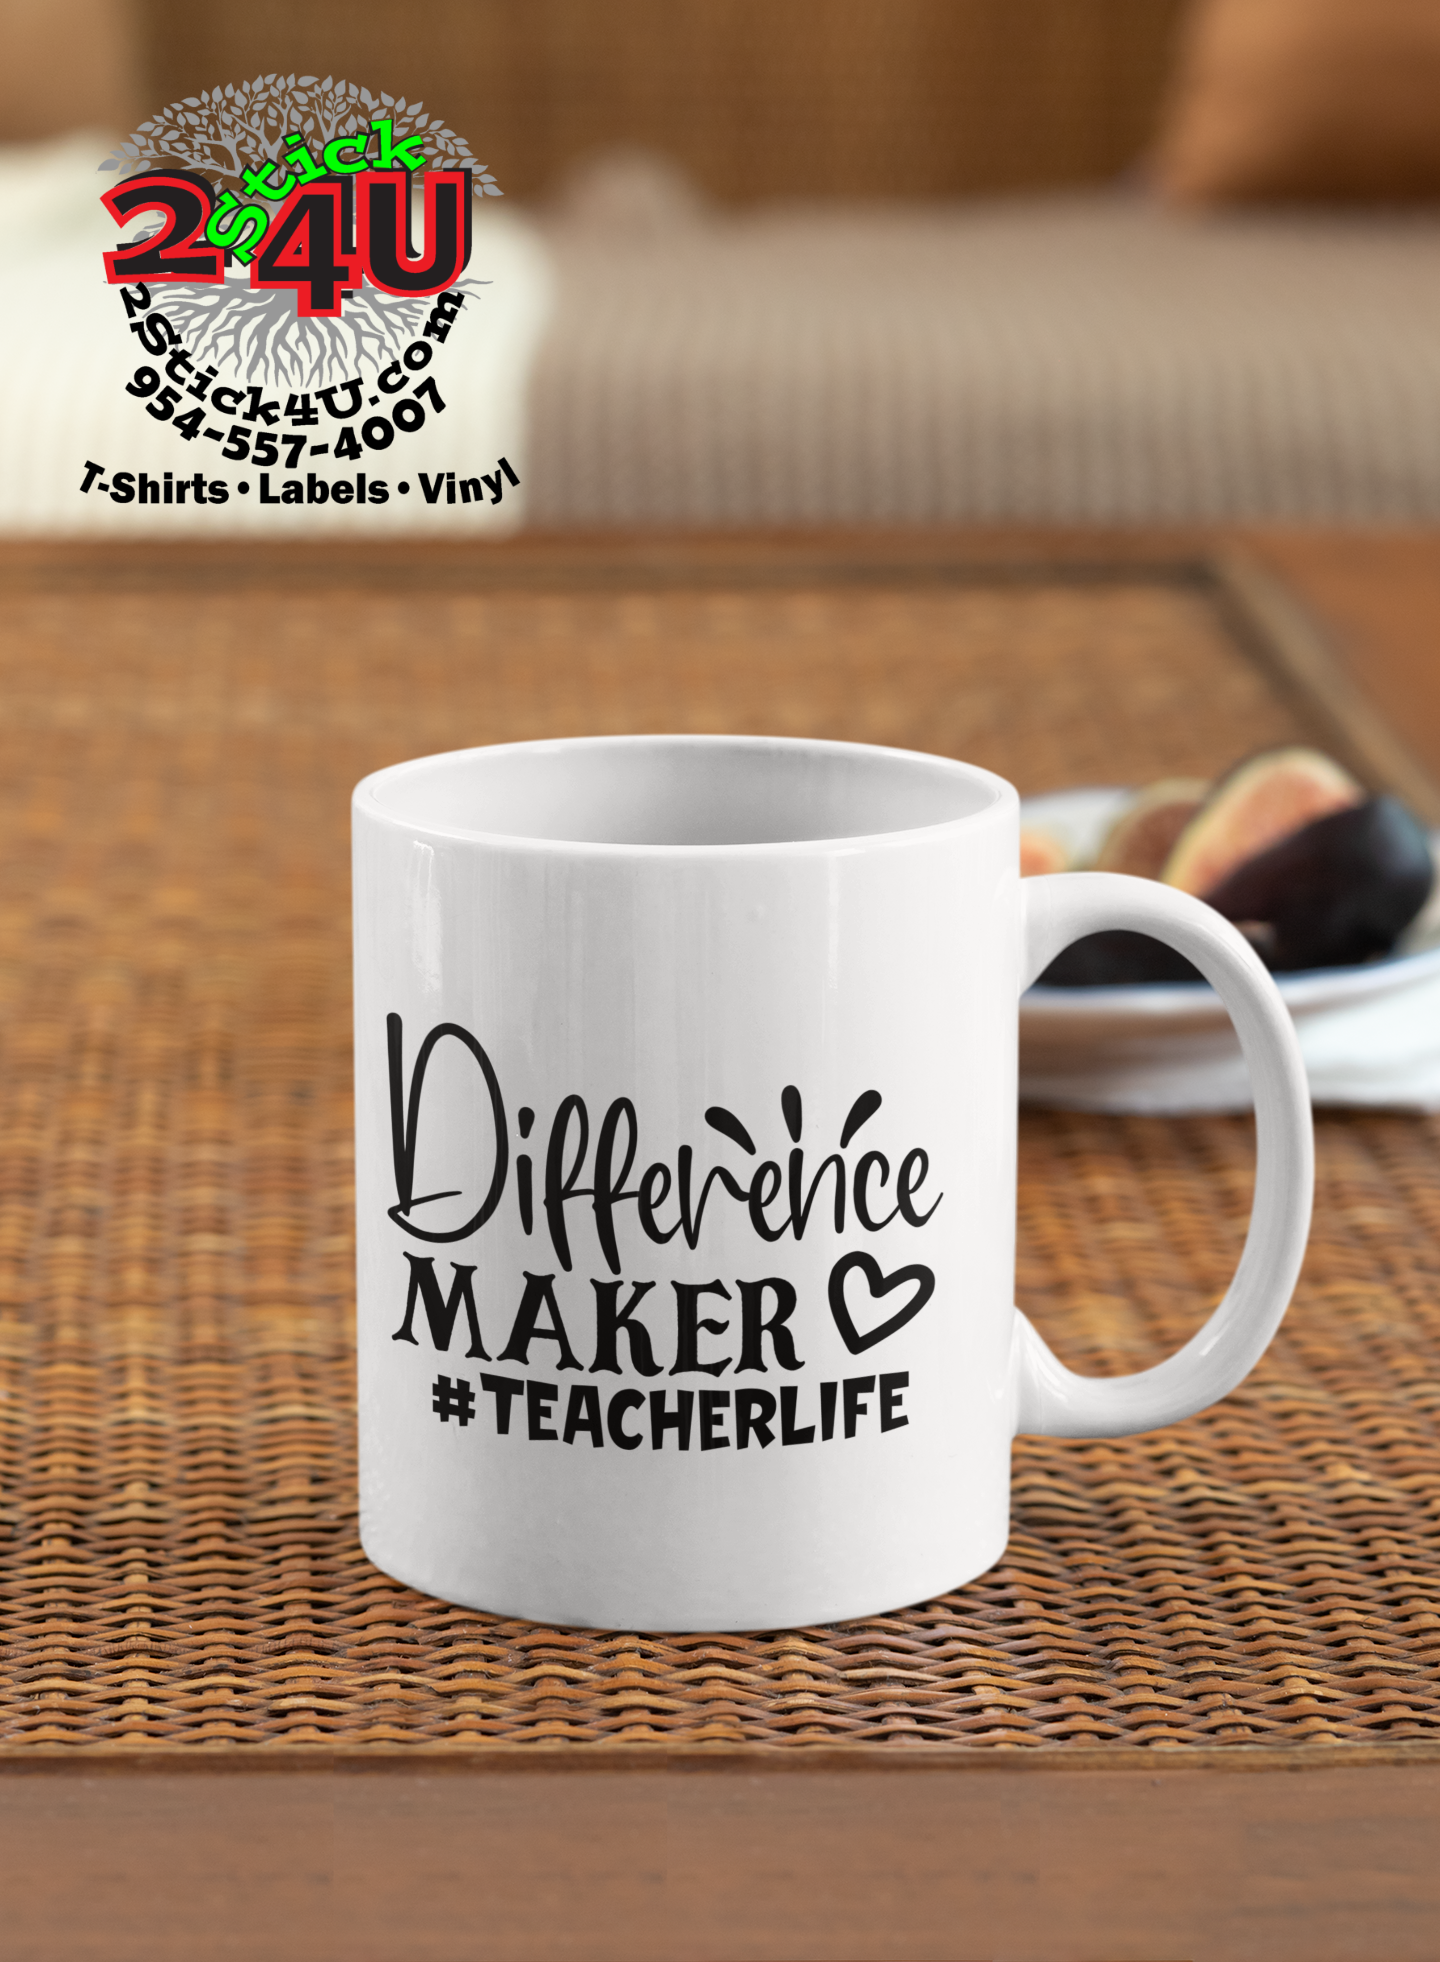 Teacher Life  - Difference Maker Coffee Mug - Home of Buy 3, Get 1 Free. Long Lasting Custom Designed Coffee Mugs for Business and Pleasure. Perfect for Christmas, Housewarming, Wedding Party gifts